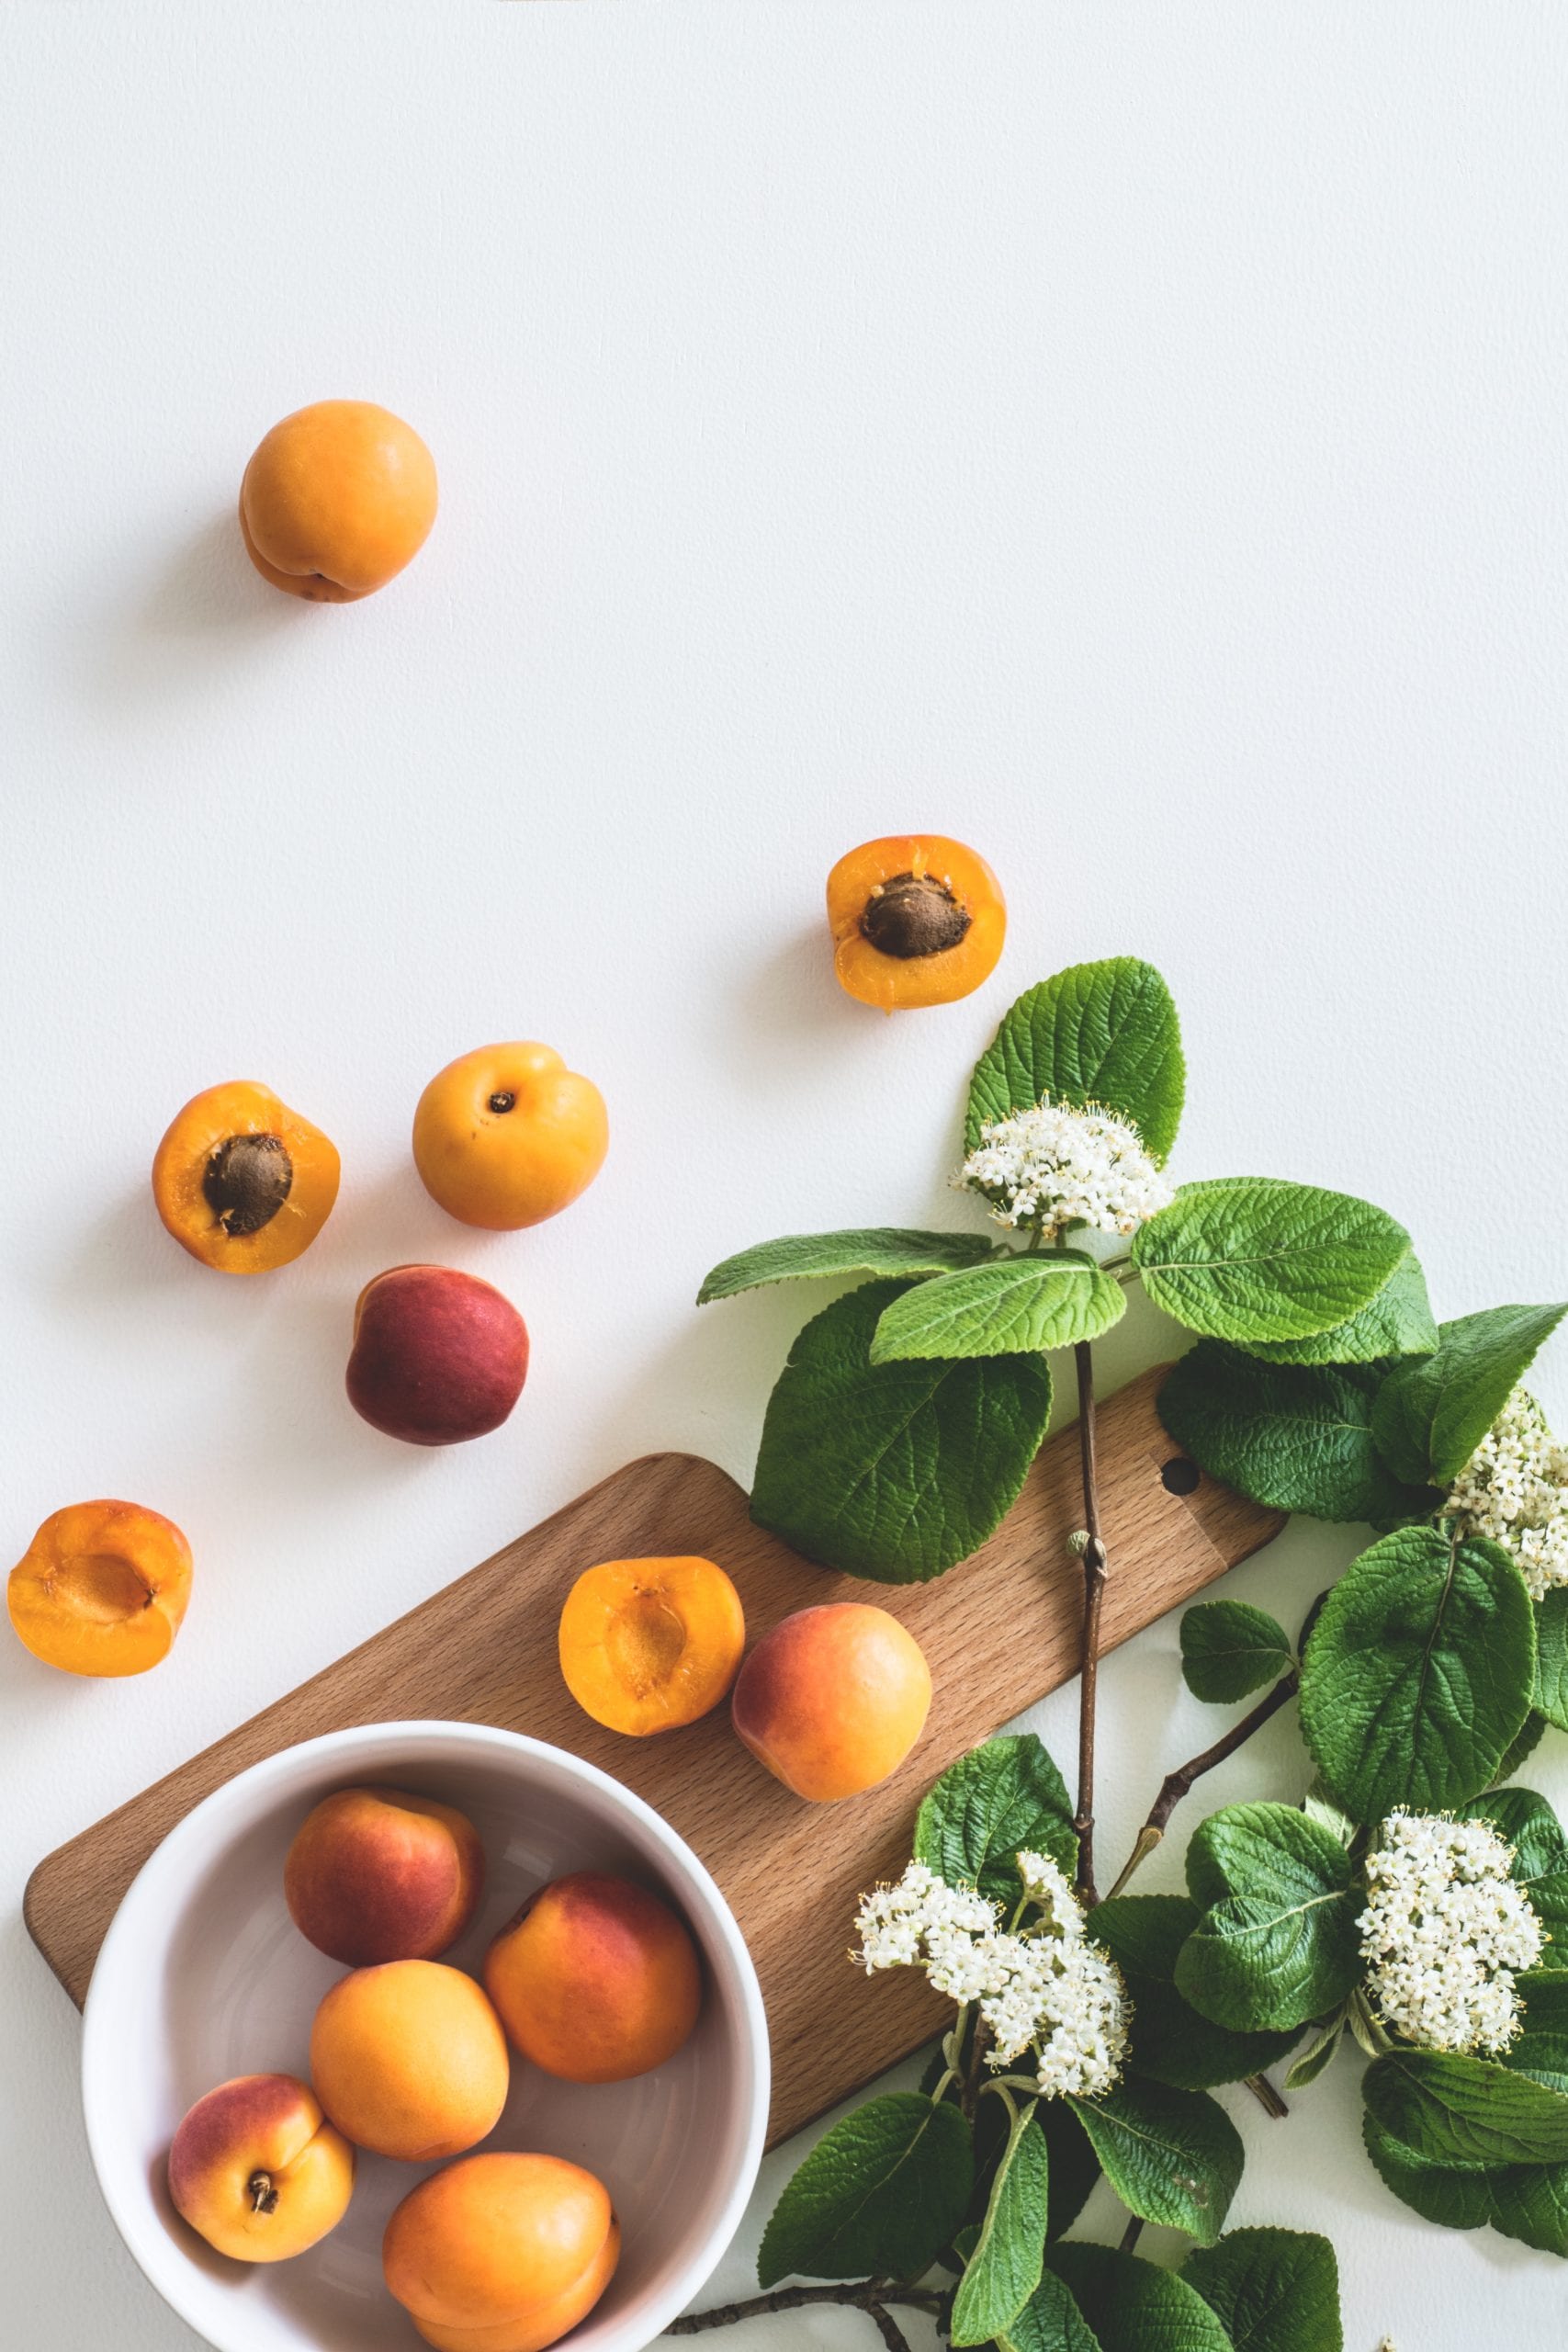 Apricots and a cutting board